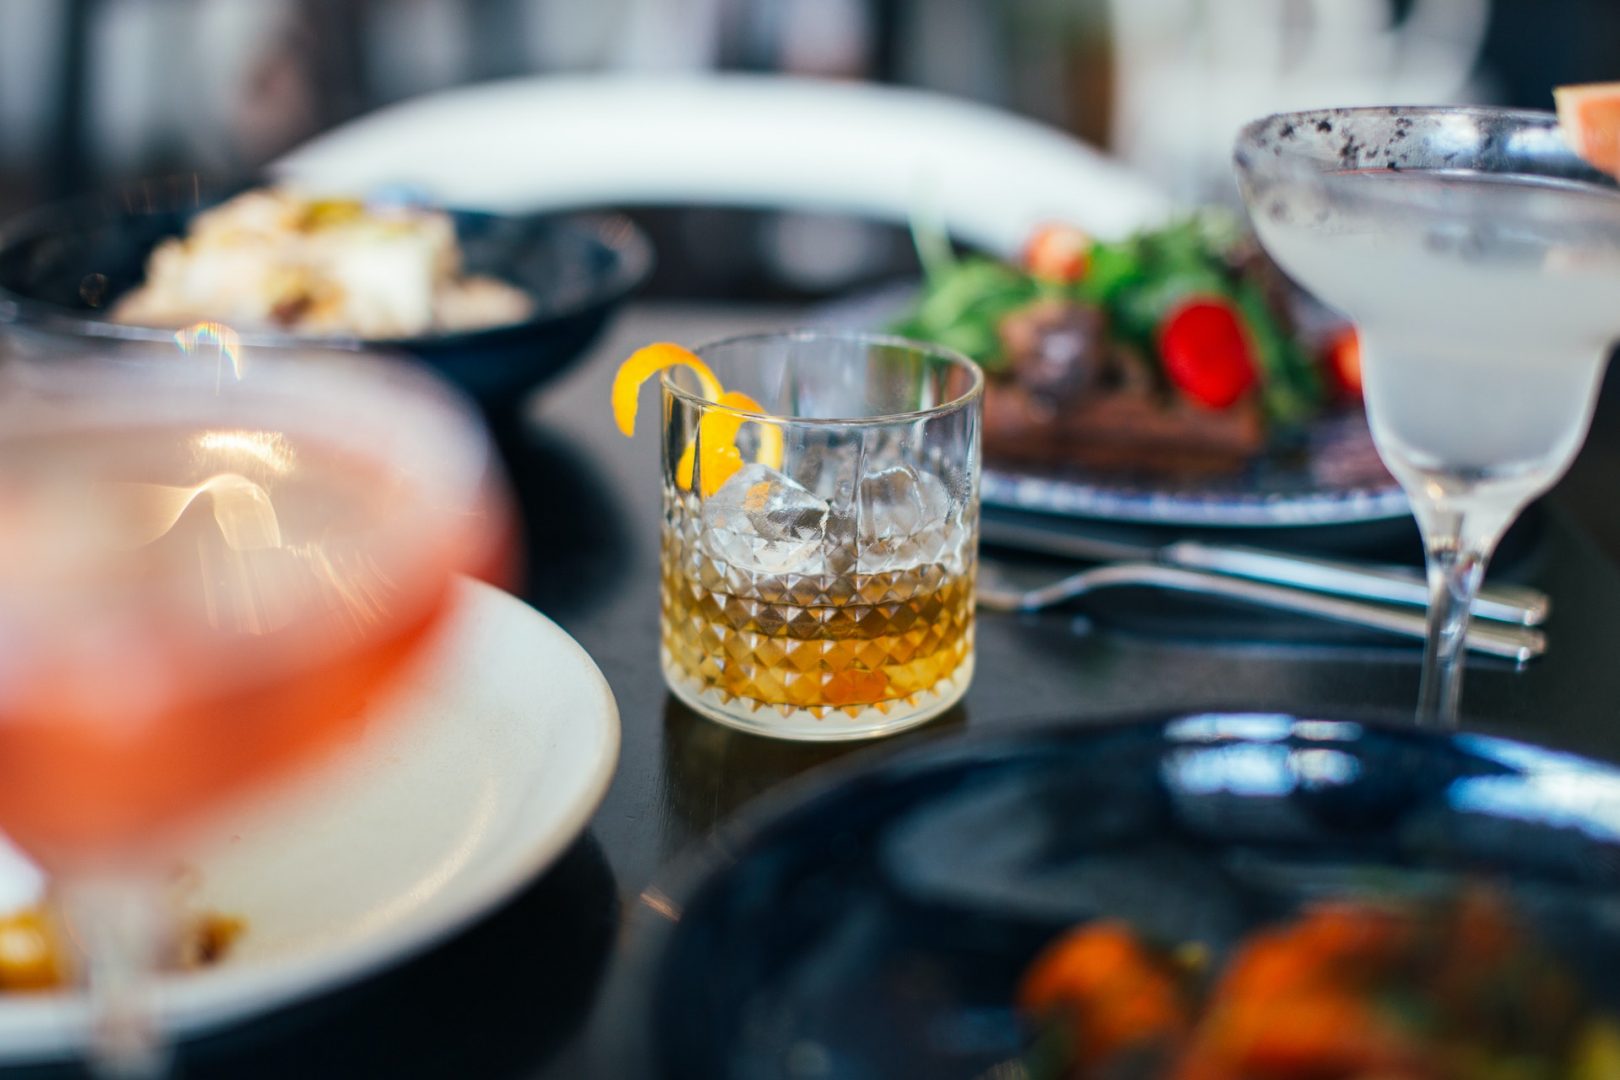 How To Food Match Your Whisky